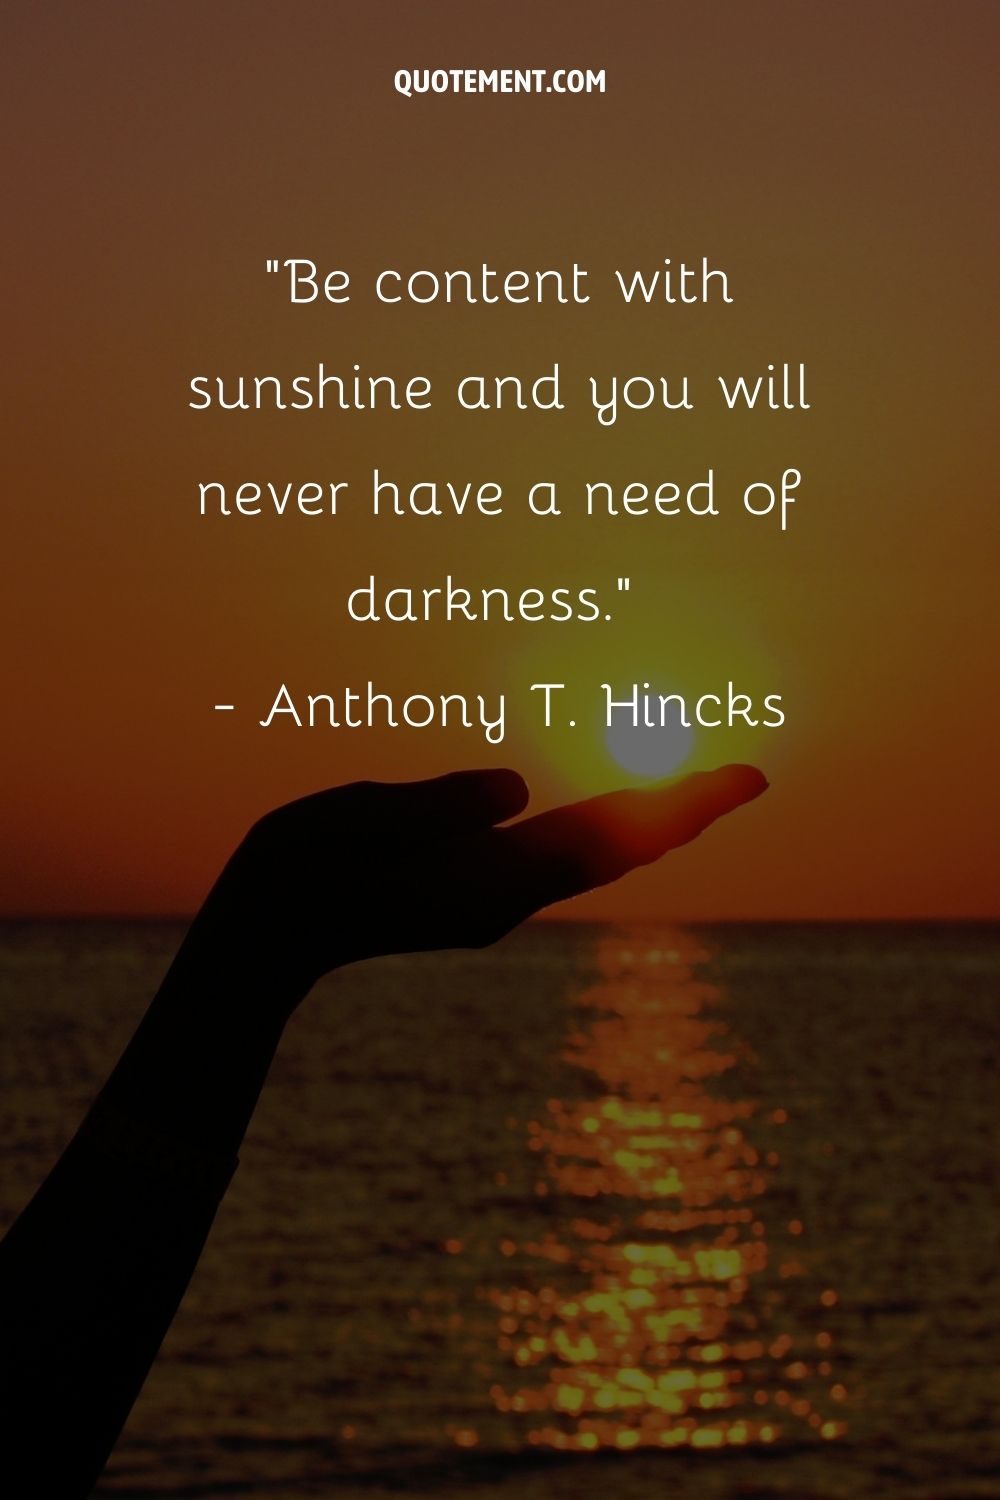 Be content with sunshine and you will never have a need of darkness